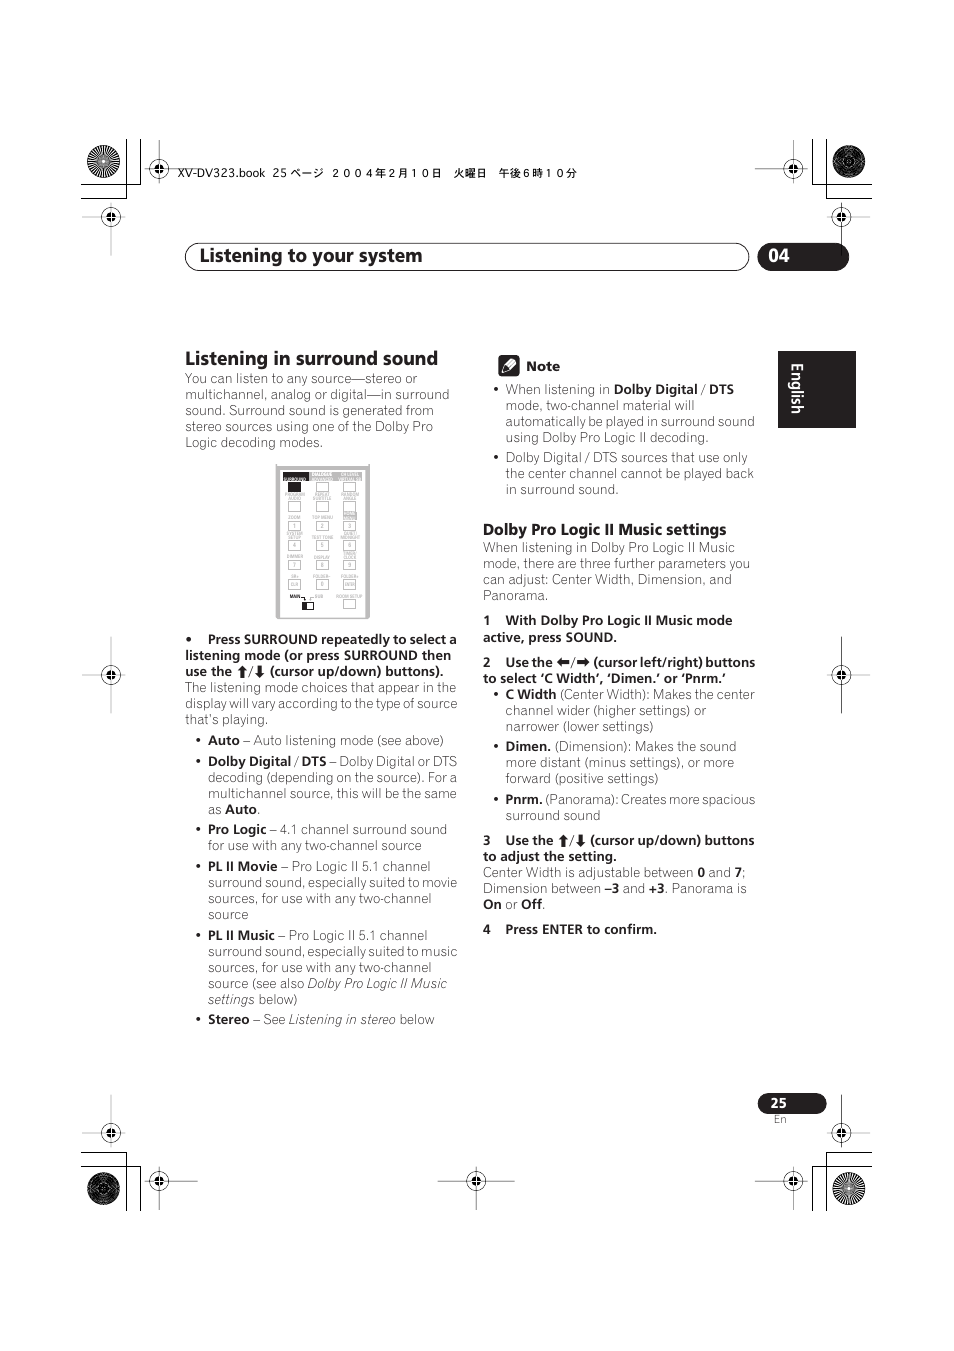 Listening in surround sound, Dolby pro logic ii music settings, Listening to your system 04 | Pioneer S-DV440 User Manual | Page 25 / 74